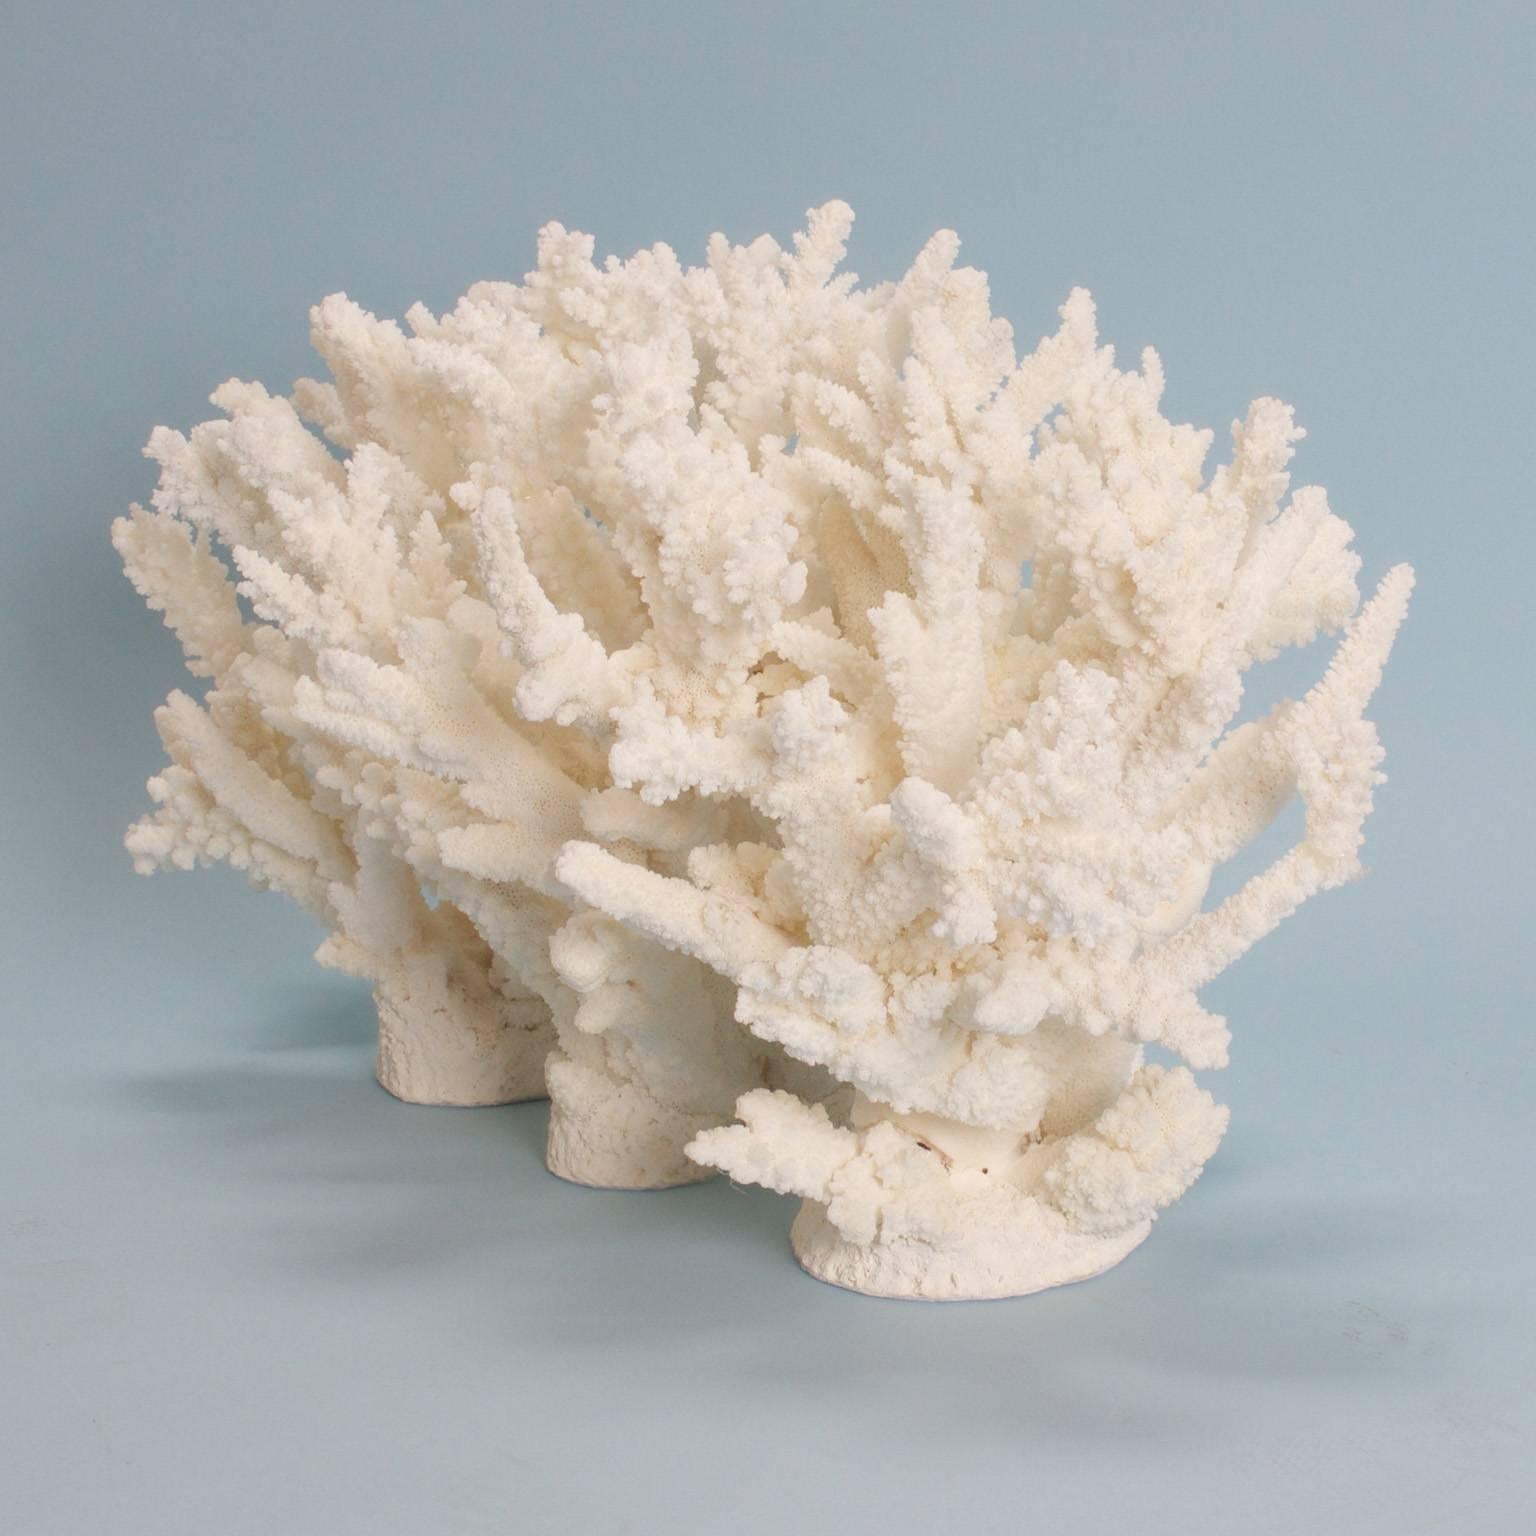 Lofty branch coral sculpture custom designed and crafted by F.S. Henemader, bringing the art of Mother Nature to any interior in need of inspiration.

This piece cannot be shipped out of the US, without expensive extra expenditures for export